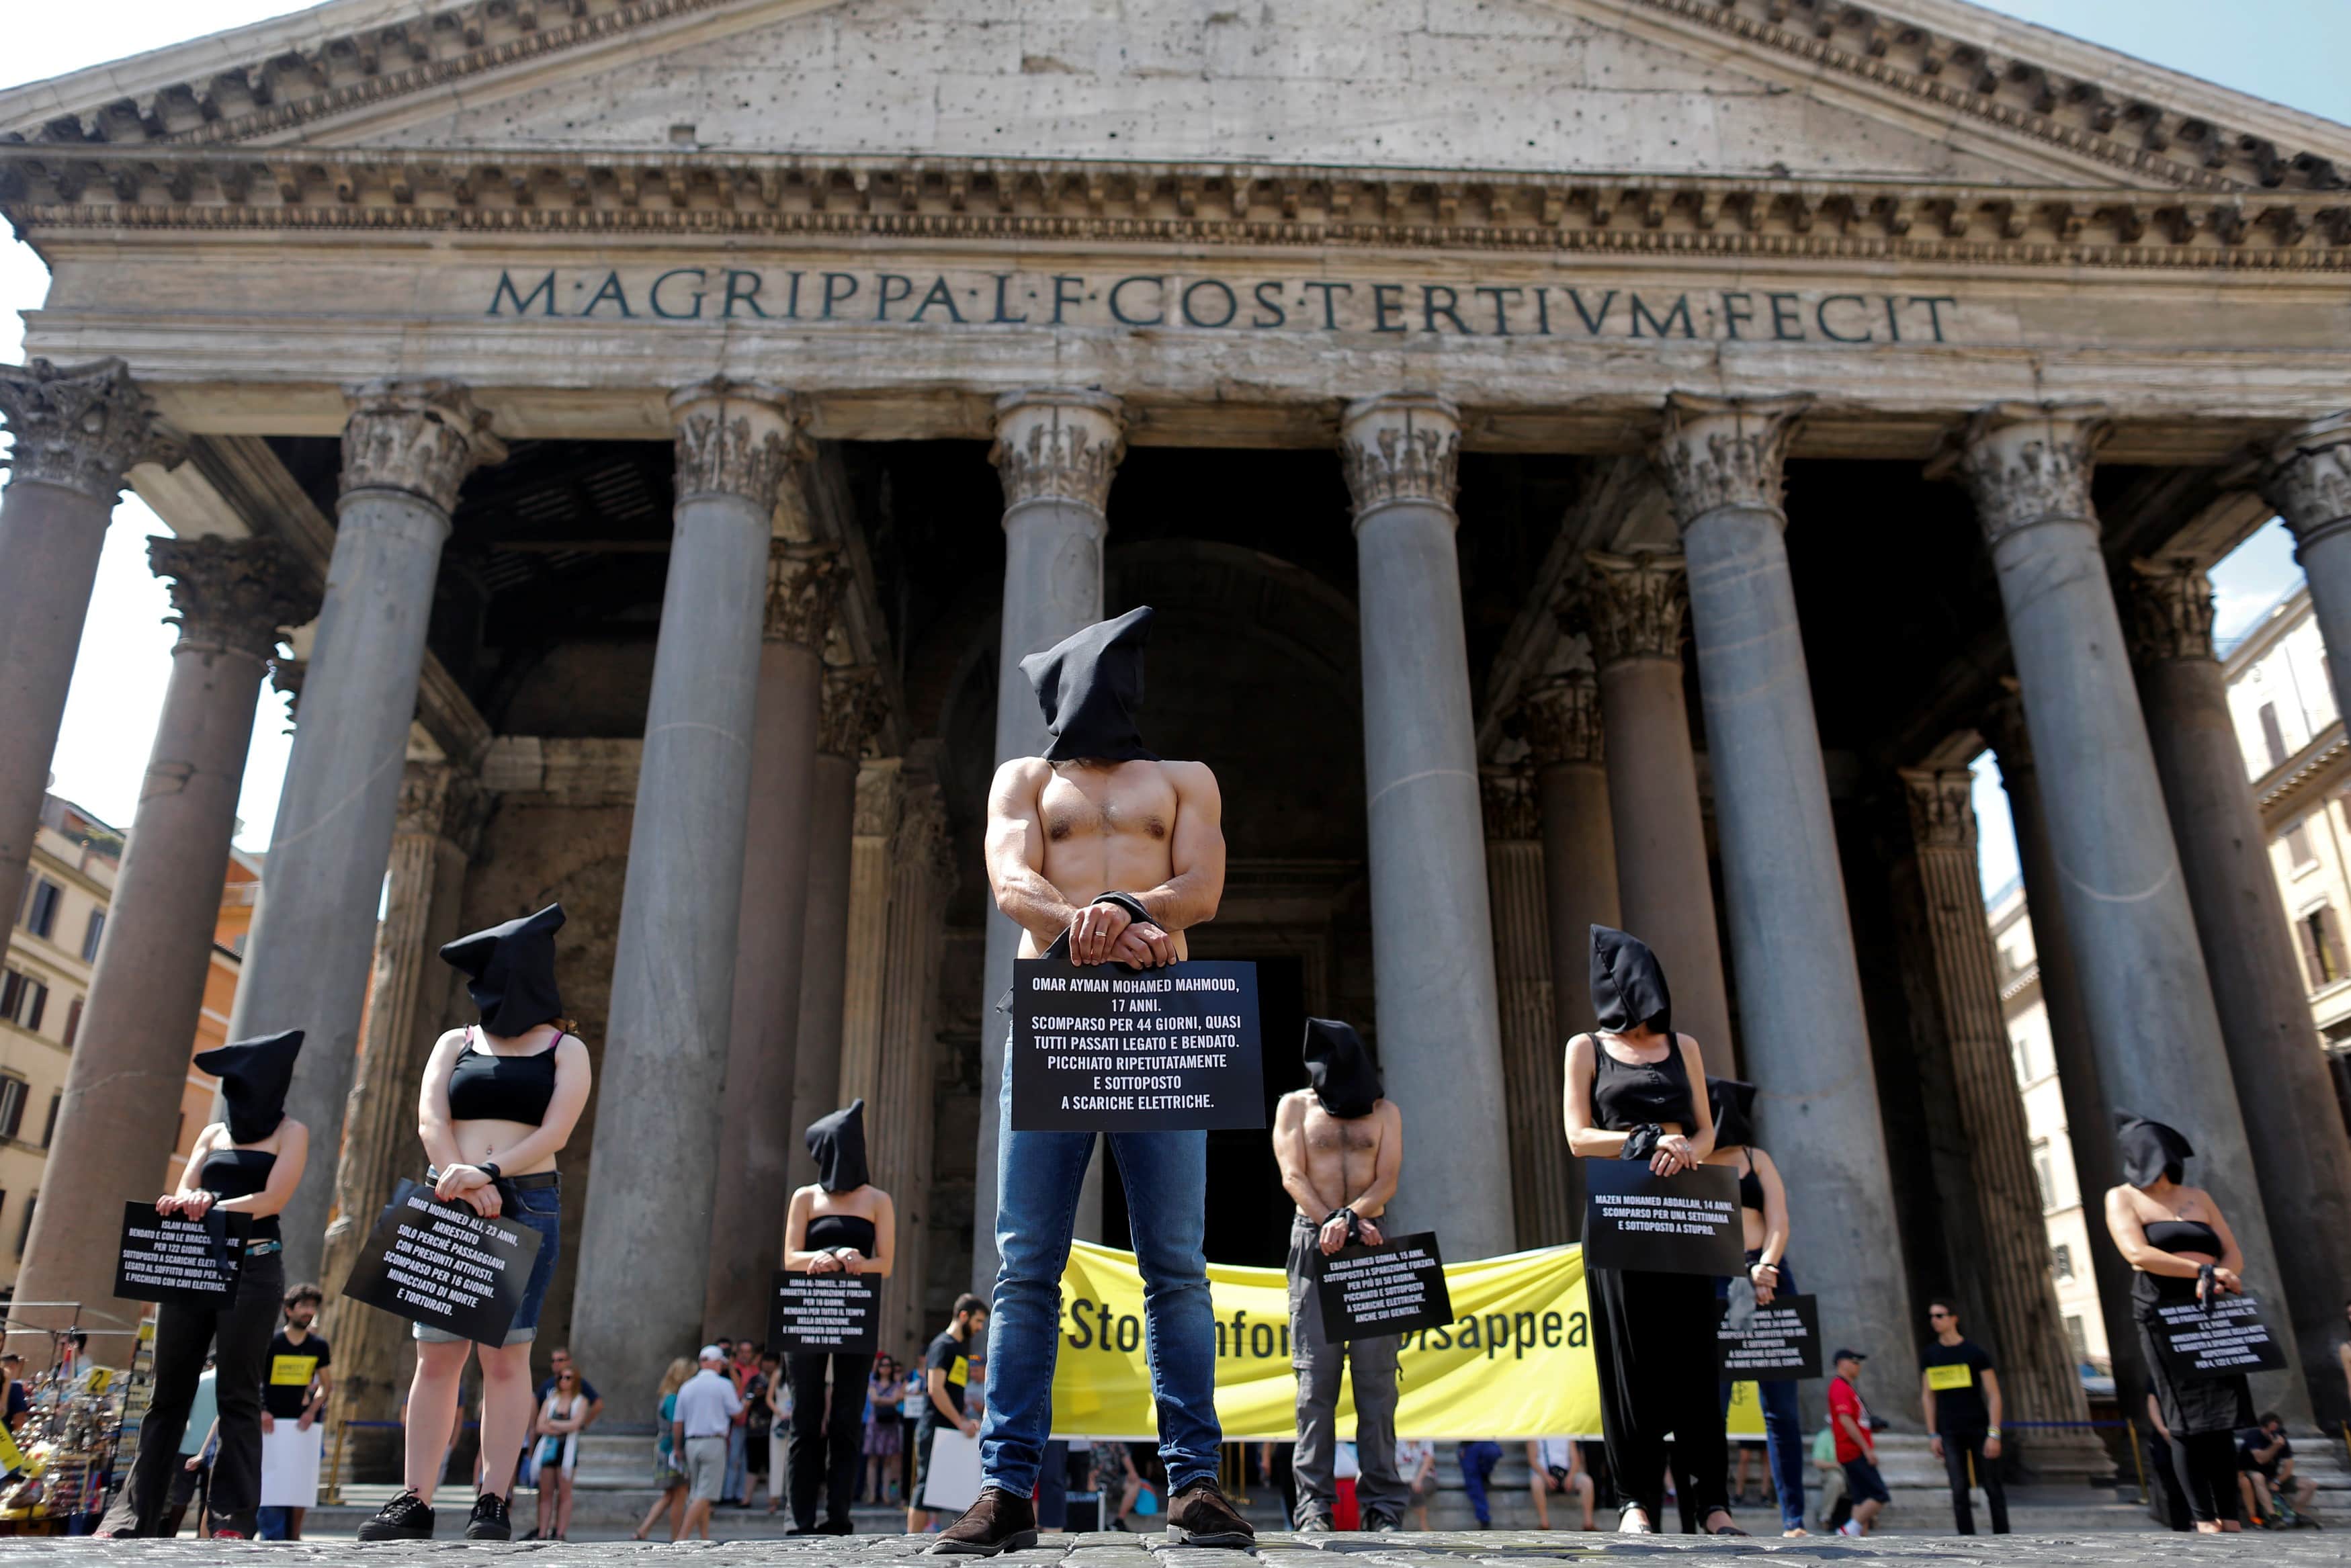 Amnesty International activists take part in a performance to protest in Rome, Italy against enforced disappearance in Egypt and elsewhere, 13 July 2016, REUTERS/Tony Gentile